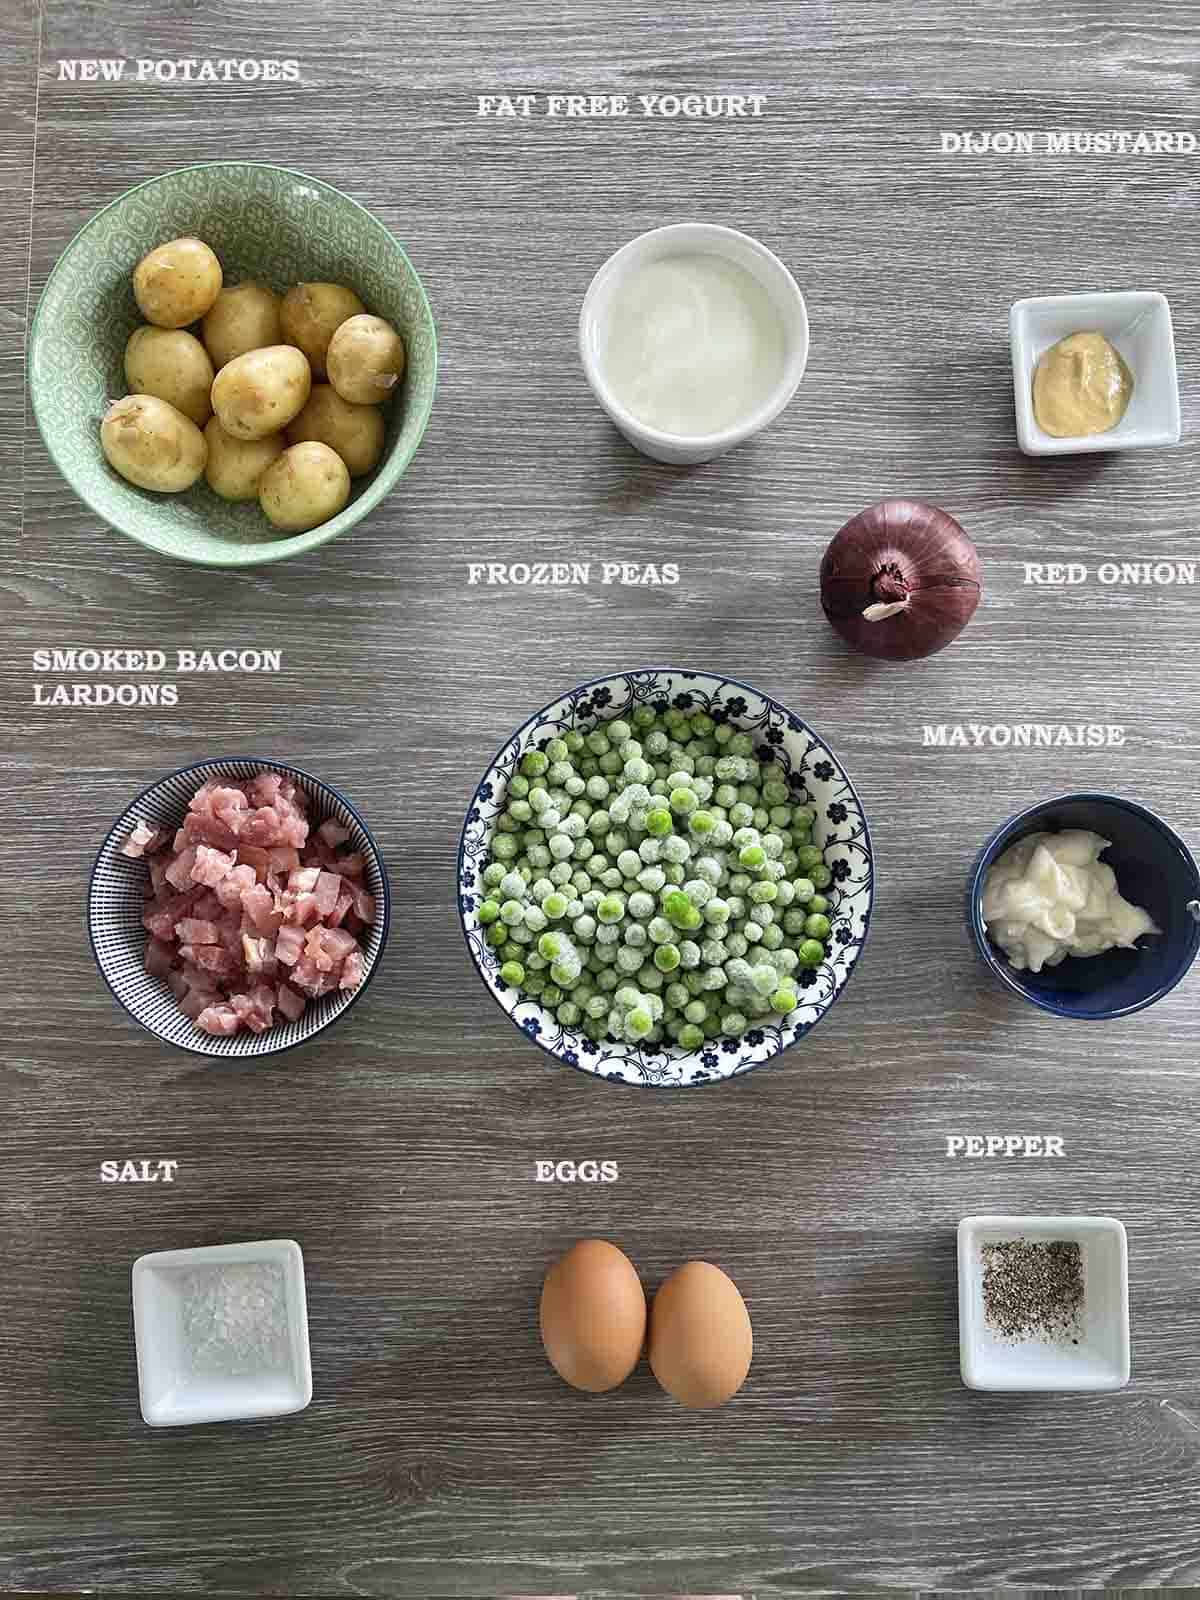 ingredients including peas, potatoes, bacon and mayonnaise.